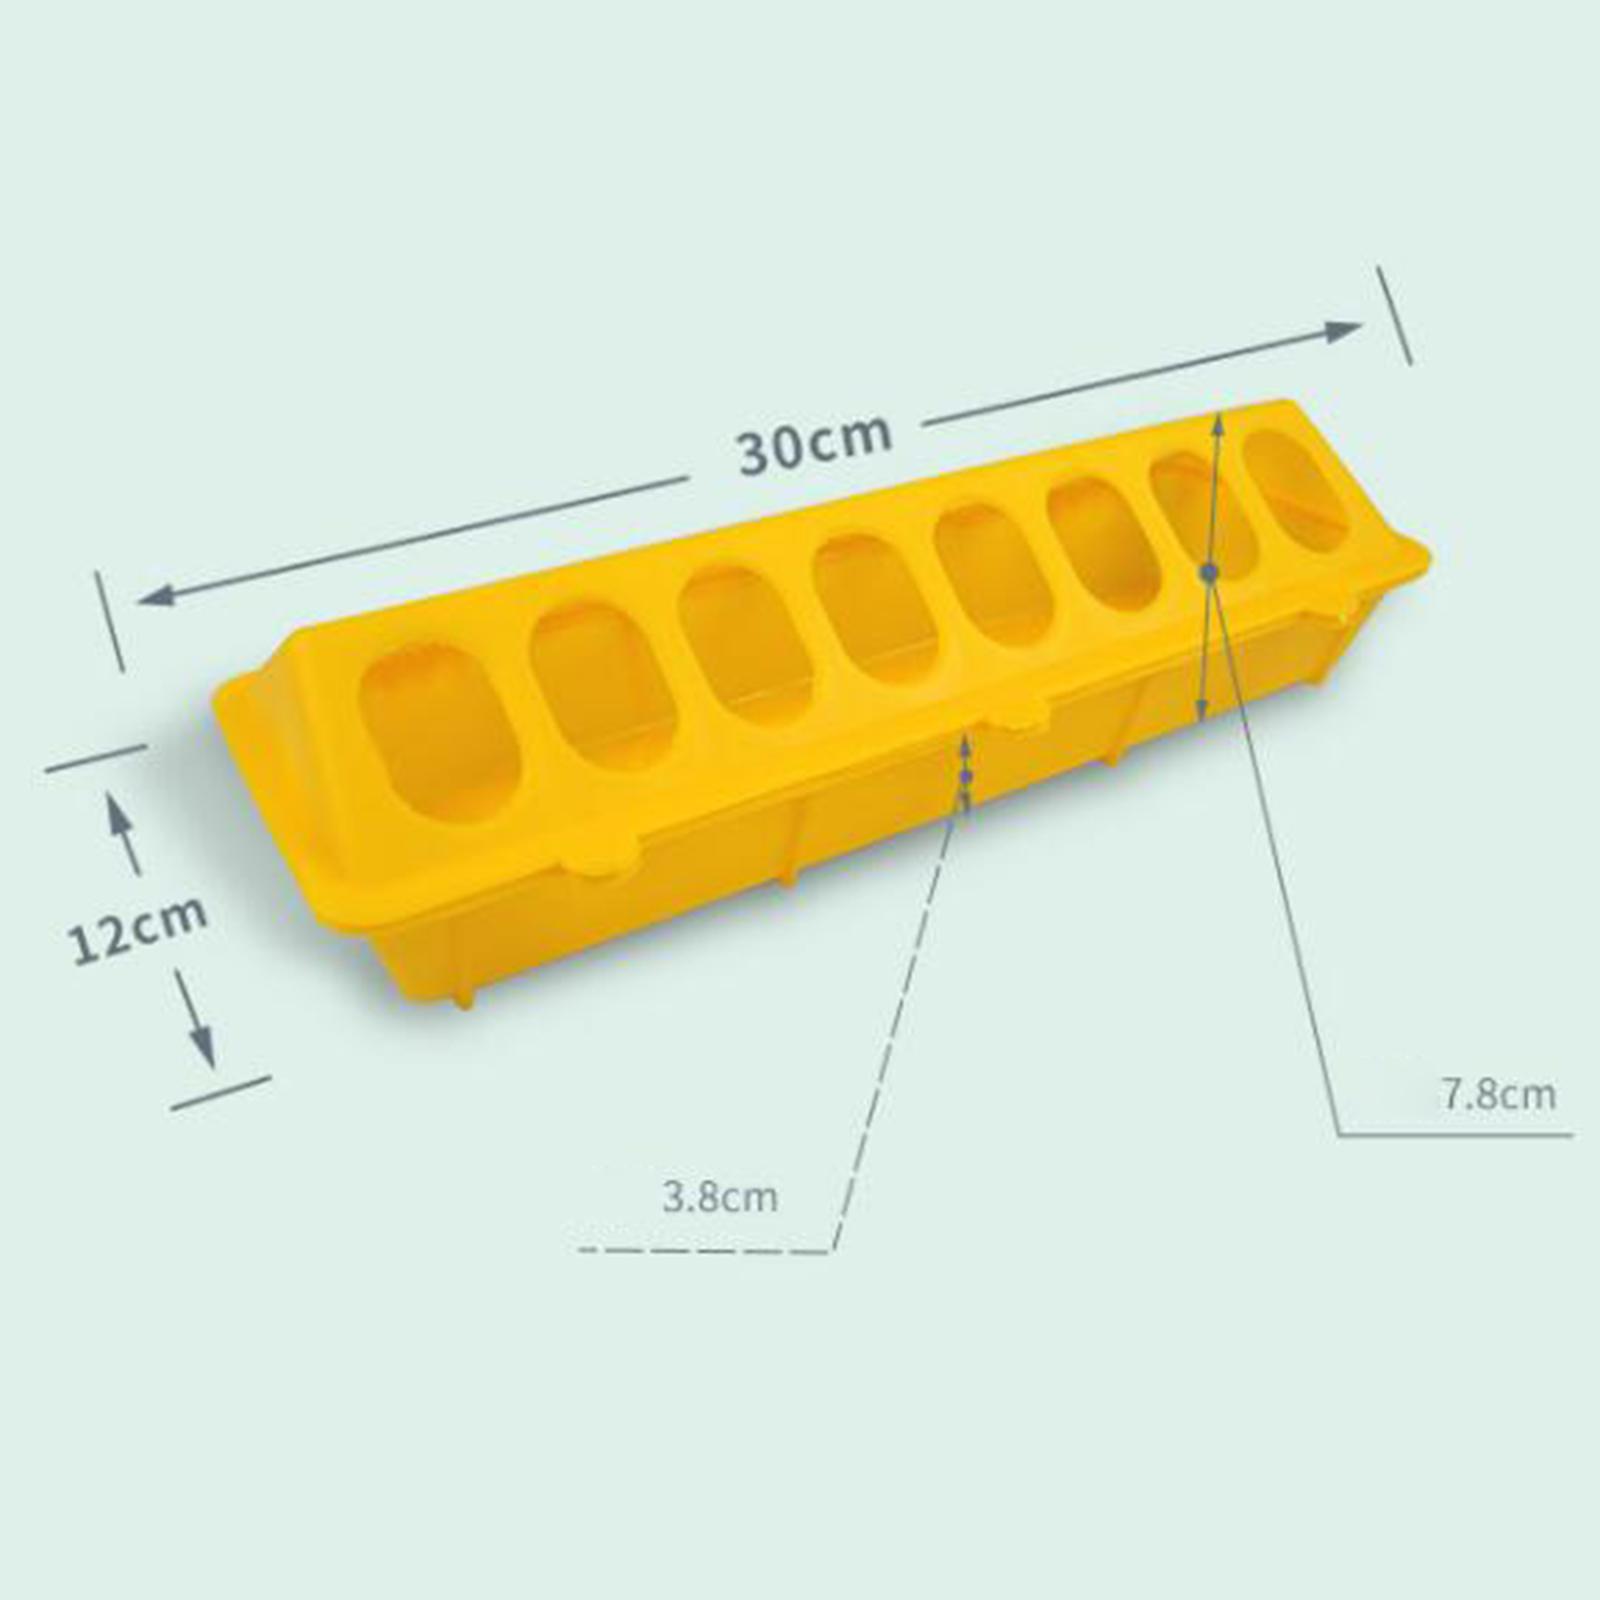 Poultry Feeder Chicken Feeding Trough Plastic Flip Top Container Yellow